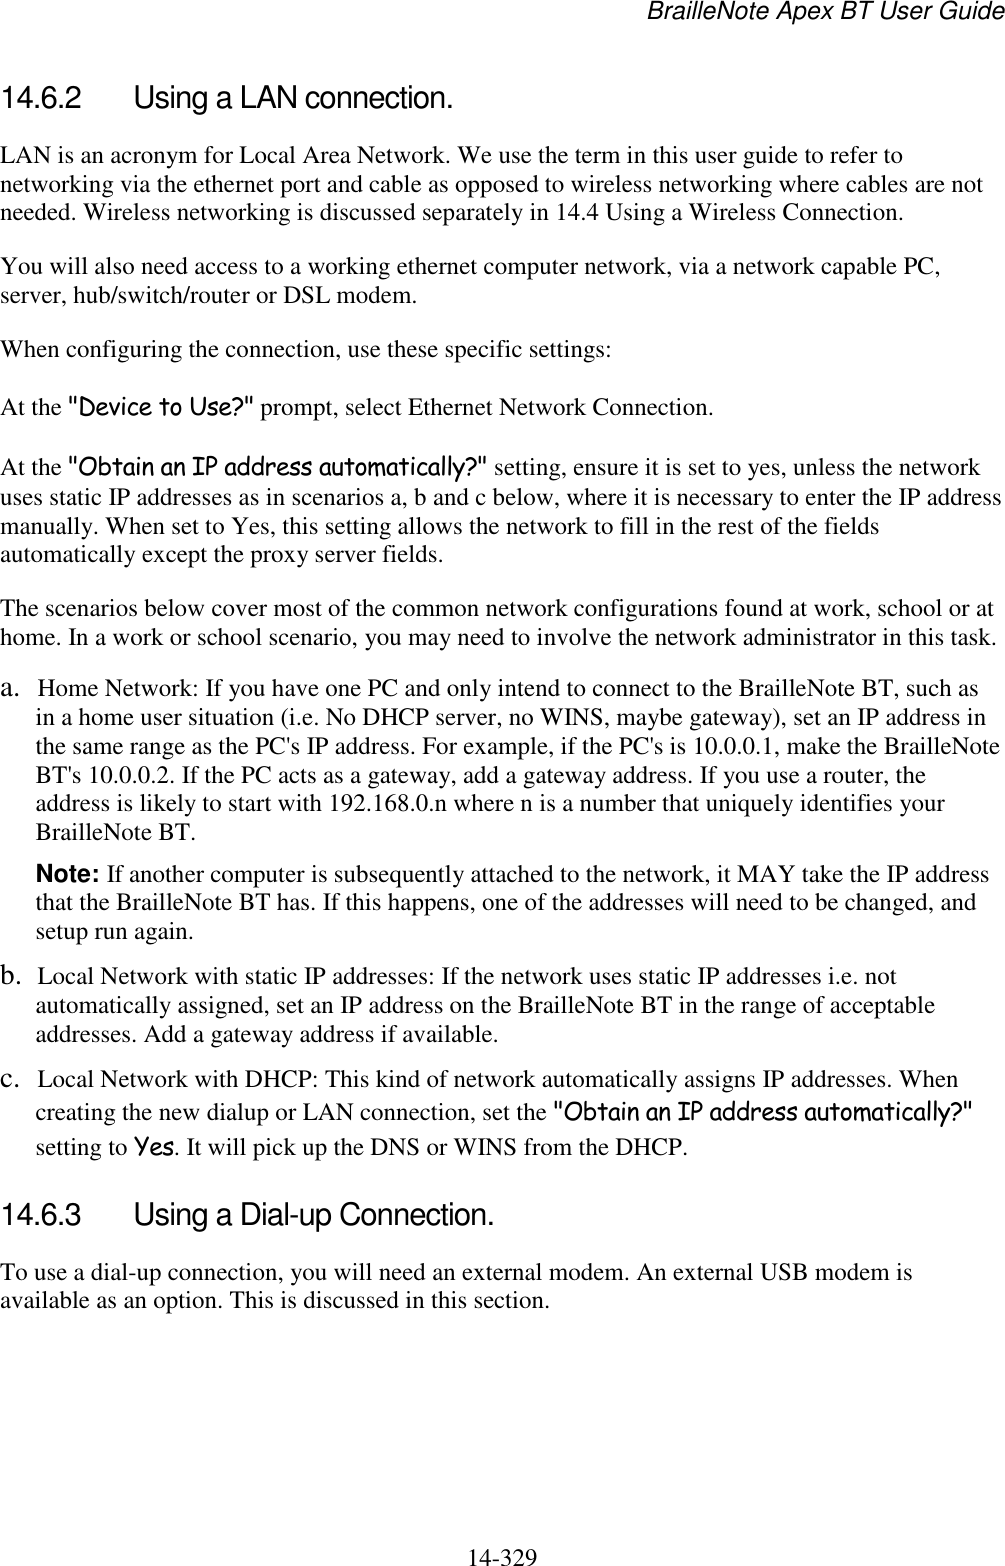 BrailleNote Apex BT User Guide   14-329   14.6.2  Using a LAN connection. LAN is an acronym for Local Area Network. We use the term in this user guide to refer to networking via the ethernet port and cable as opposed to wireless networking where cables are not needed. Wireless networking is discussed separately in 14.4 Using a Wireless Connection. You will also need access to a working ethernet computer network, via a network capable PC, server, hub/switch/router or DSL modem. When configuring the connection, use these specific settings: At the &quot;Device to Use?&quot; prompt, select Ethernet Network Connection. At the &quot;Obtain an IP address automatically?&quot; setting, ensure it is set to yes, unless the network uses static IP addresses as in scenarios a, b and c below, where it is necessary to enter the IP address manually. When set to Yes, this setting allows the network to fill in the rest of the fields automatically except the proxy server fields. The scenarios below cover most of the common network configurations found at work, school or at home. In a work or school scenario, you may need to involve the network administrator in this task. a. Home Network: If you have one PC and only intend to connect to the BrailleNote BT, such as in a home user situation (i.e. No DHCP server, no WINS, maybe gateway), set an IP address in the same range as the PC&apos;s IP address. For example, if the PC&apos;s is 10.0.0.1, make the BrailleNote BT&apos;s 10.0.0.2. If the PC acts as a gateway, add a gateway address. If you use a router, the address is likely to start with 192.168.0.n where n is a number that uniquely identifies your BrailleNote BT. Note: If another computer is subsequently attached to the network, it MAY take the IP address that the BrailleNote BT has. If this happens, one of the addresses will need to be changed, and setup run again. b. Local Network with static IP addresses: If the network uses static IP addresses i.e. not automatically assigned, set an IP address on the BrailleNote BT in the range of acceptable addresses. Add a gateway address if available. c. Local Network with DHCP: This kind of network automatically assigns IP addresses. When creating the new dialup or LAN connection, set the &quot;Obtain an IP address automatically?&quot; setting to Yes. It will pick up the DNS or WINS from the DHCP.  14.6.3  Using a Dial-up Connection. To use a dial-up connection, you will need an external modem. An external USB modem is available as an option. This is discussed in this section.   